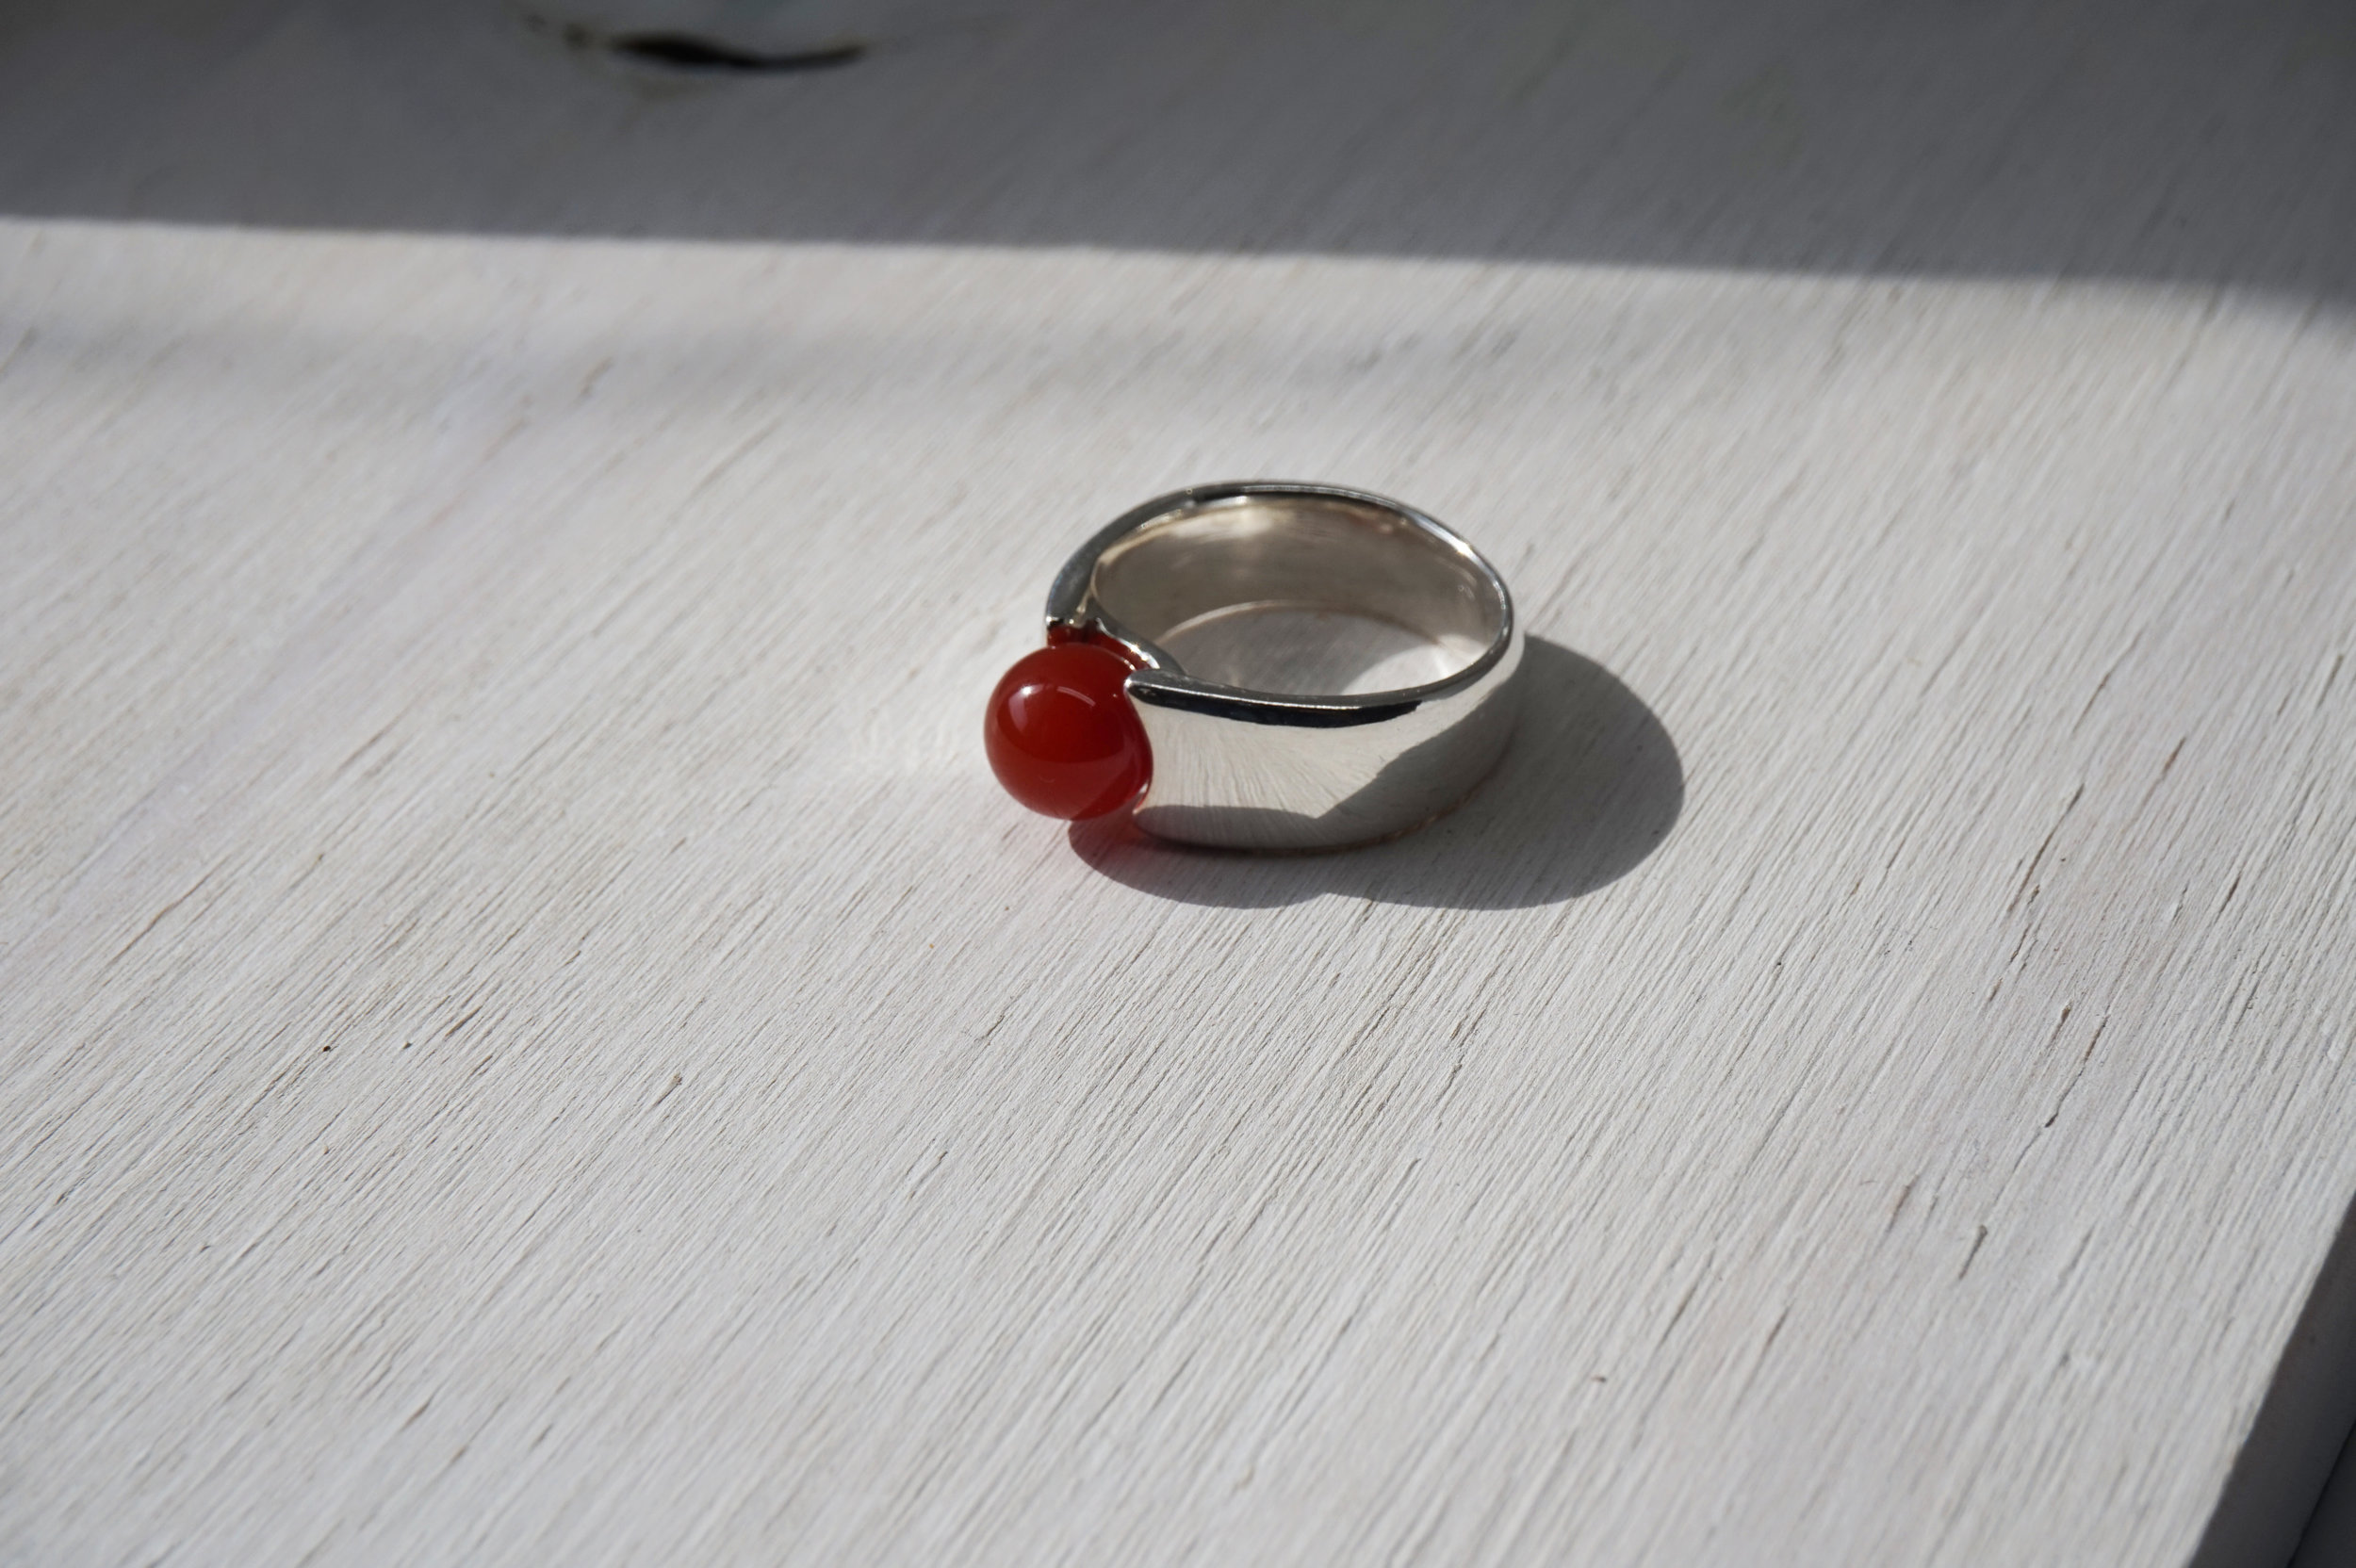 Buy Coral Ring Men, Red Coral Ring Gemstone Ring, Handmade Authentic Red  Coral 925 Sterling Silver Genuine Stone Men Ring Size 10, Gift for Him  Online in India - Etsy